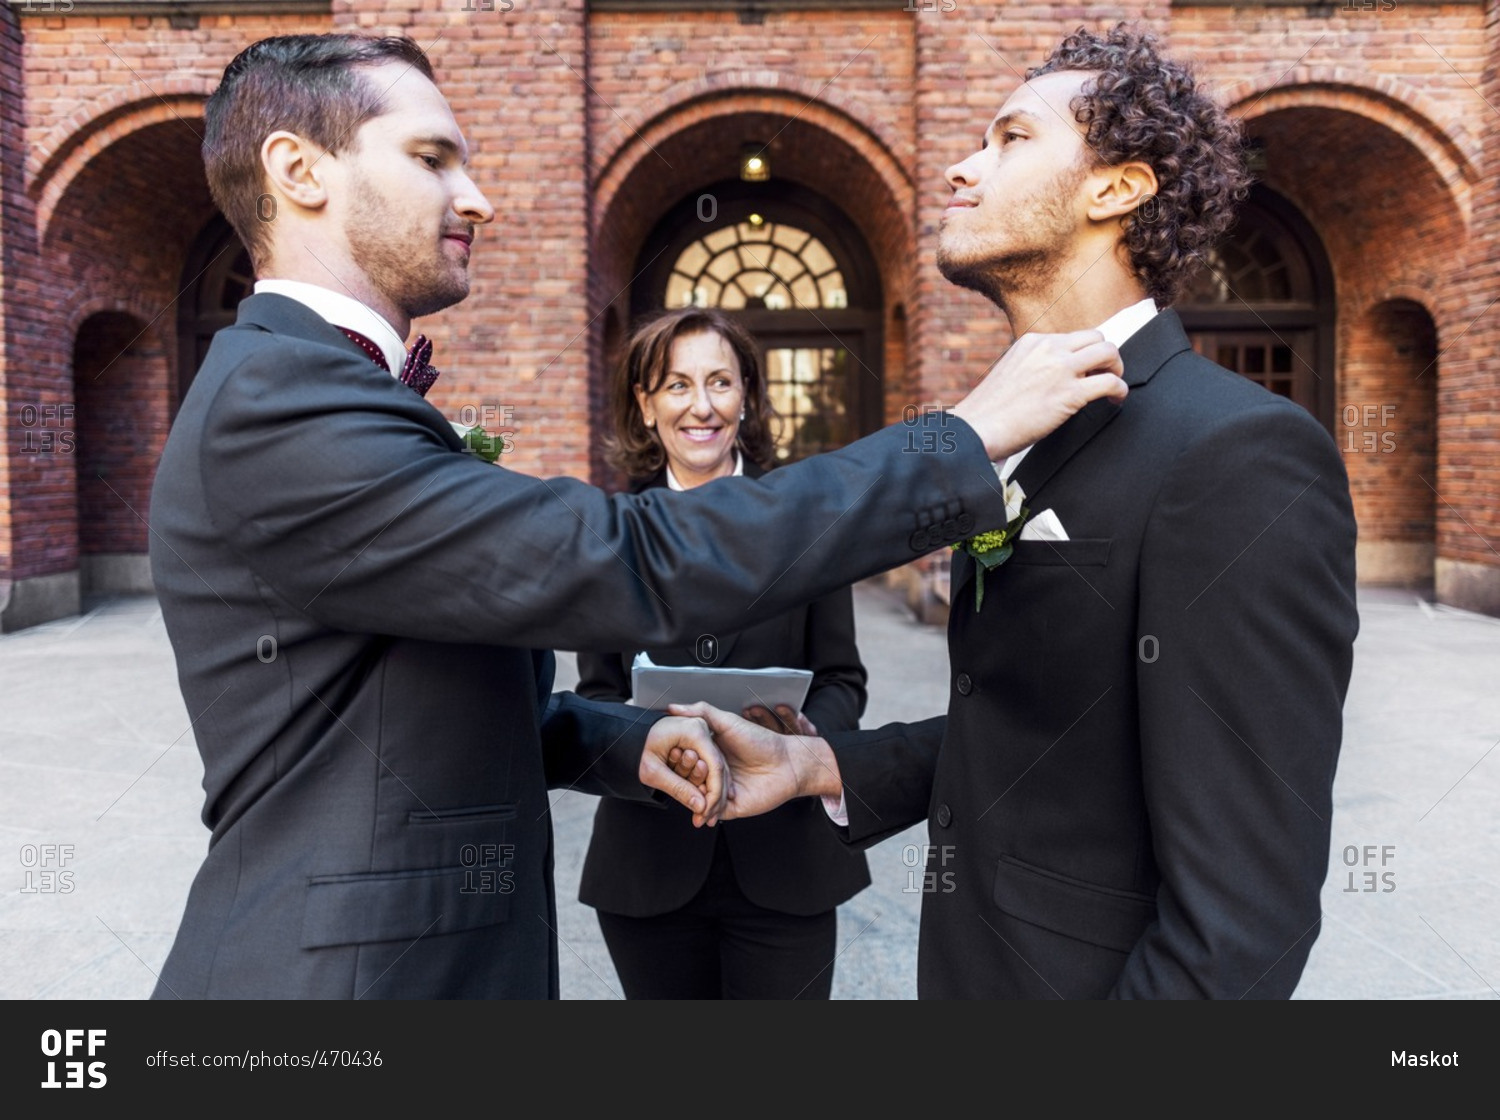 Man adjusting bow tie of gay partner in front of priest during wedding ceremony